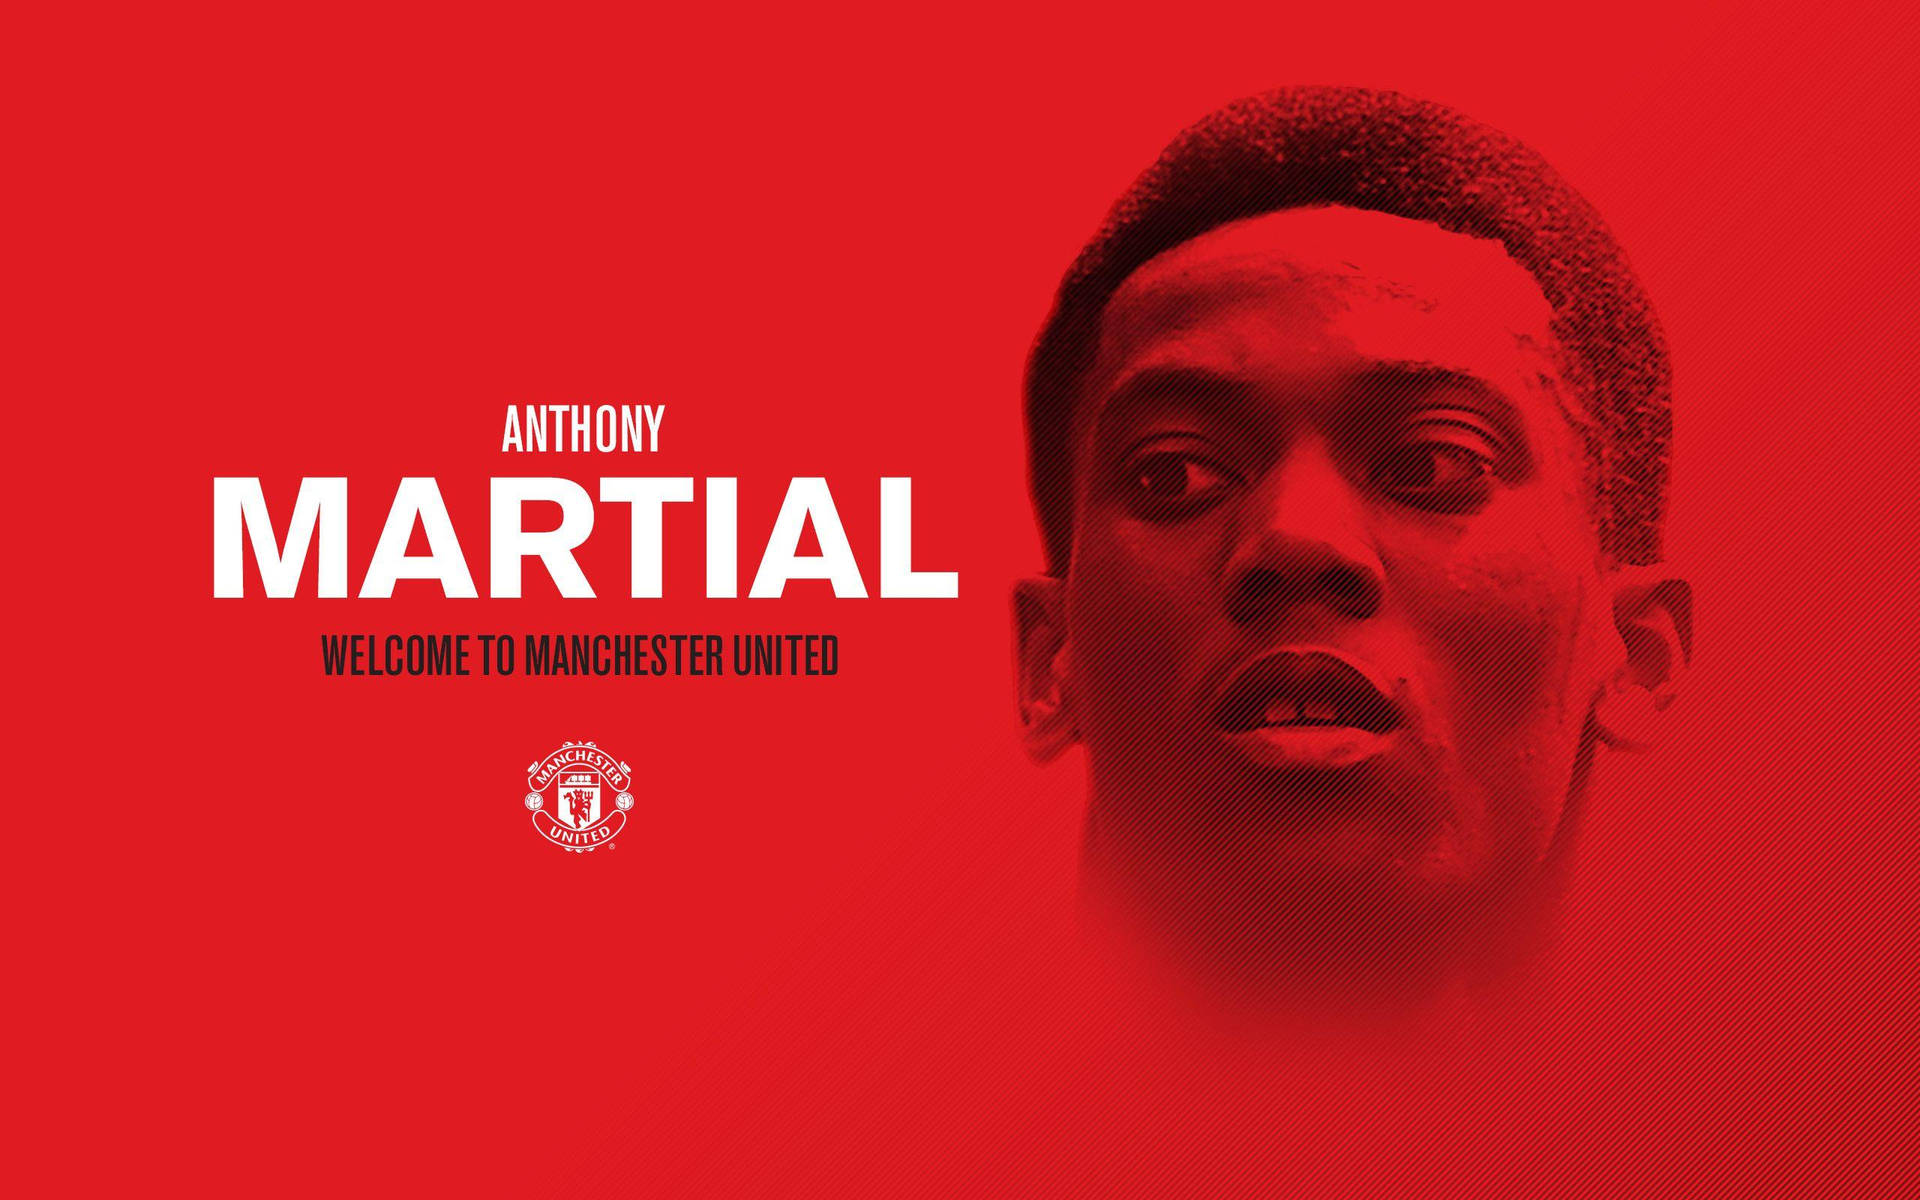 Anthony Martial Welcome Red Background Wallpaper